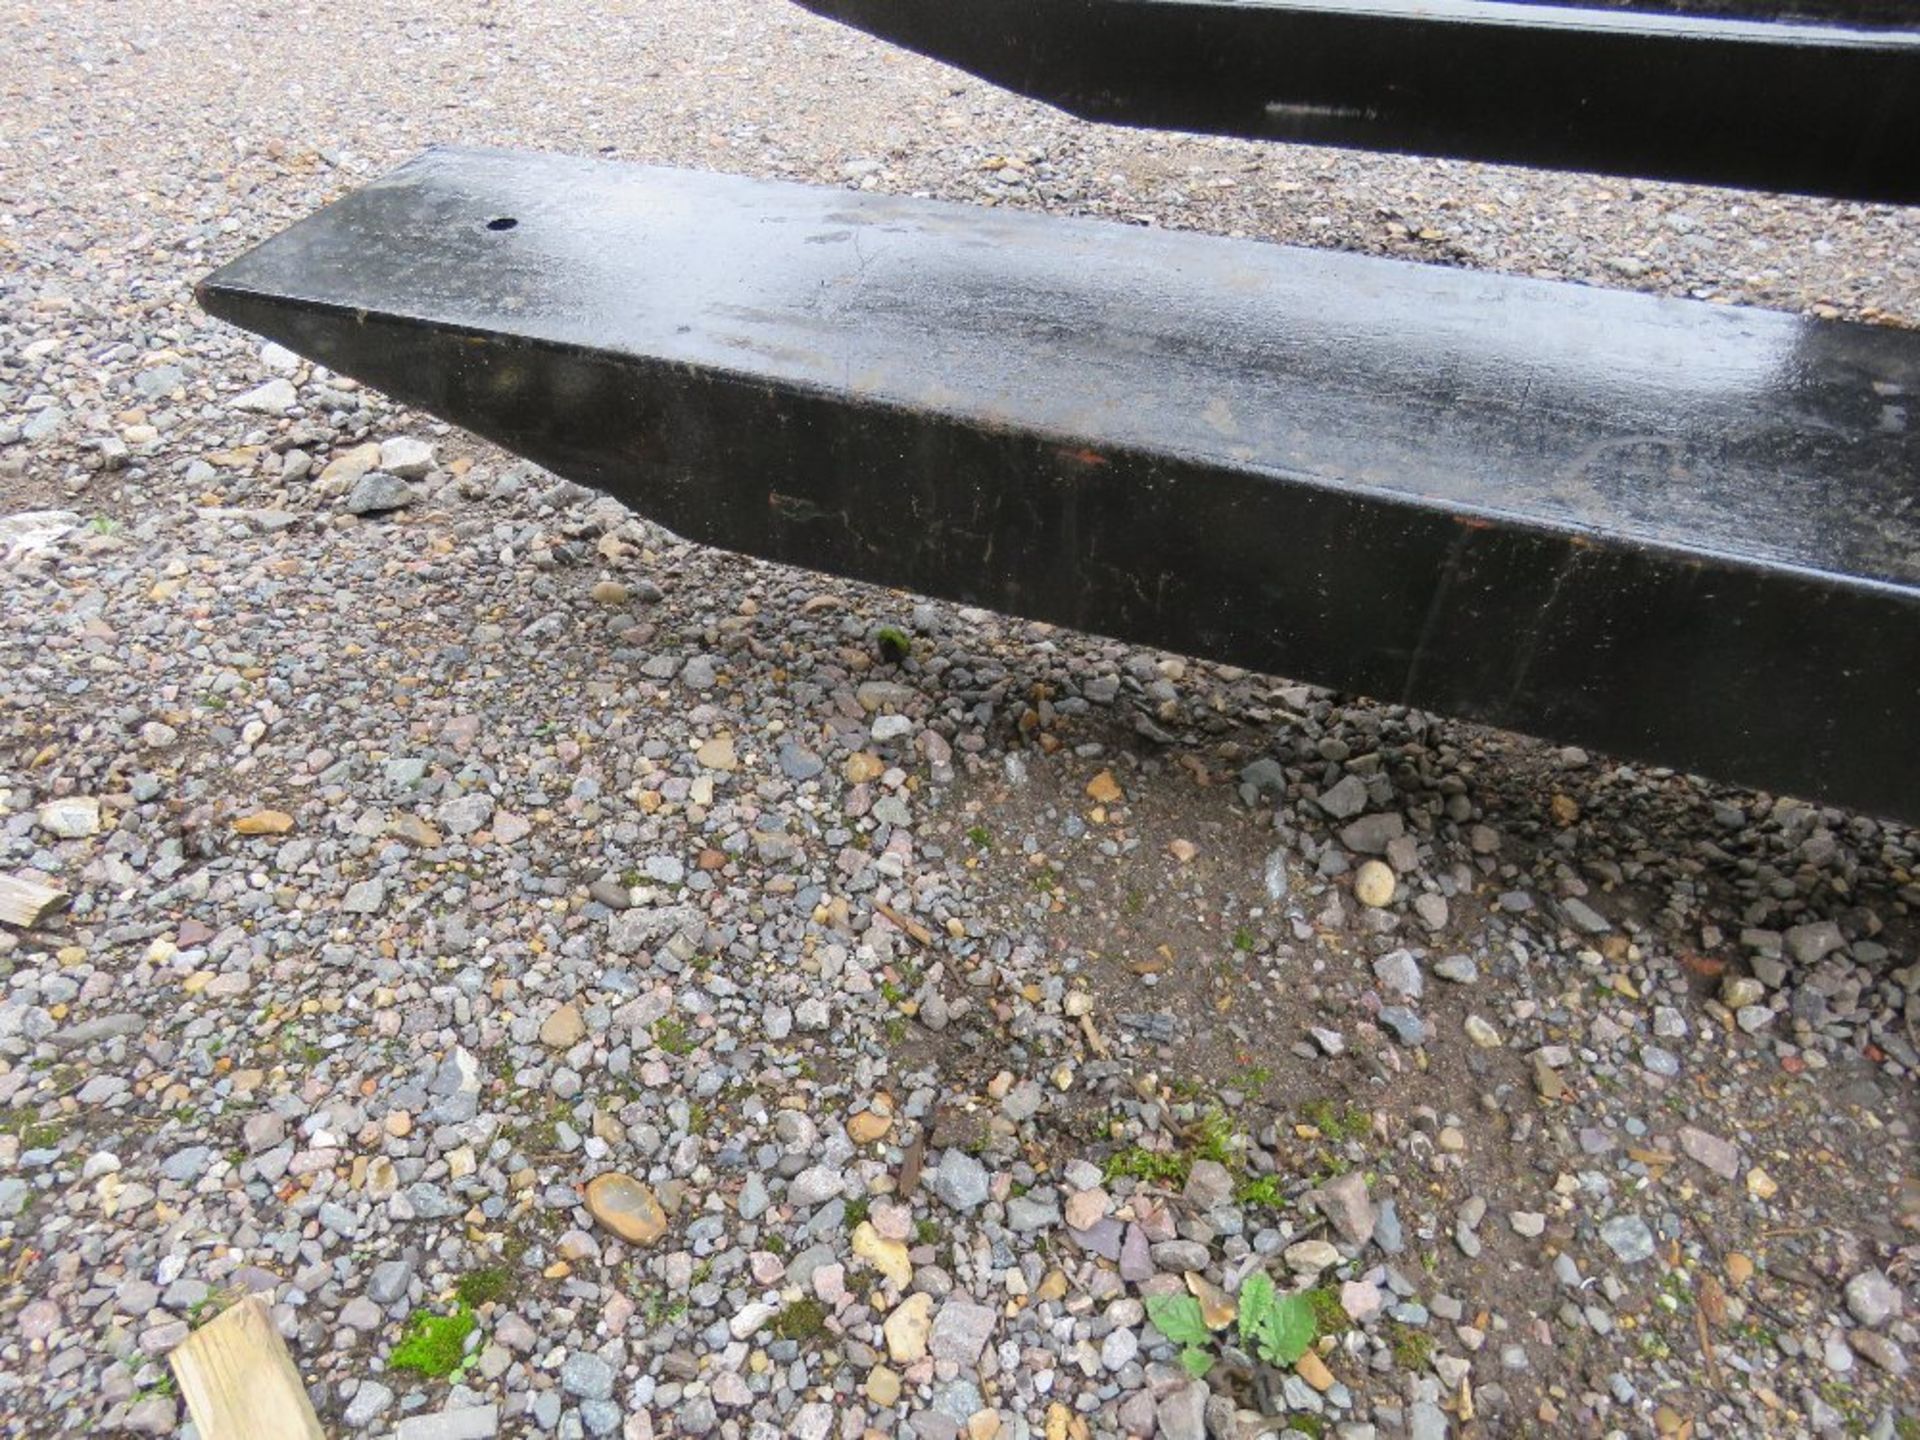 PAIR OF FORKLIFT EXTENSION TINES / SLEEVES 9FT WIDE X 7" WIDTH APPROX, WITH LOCKING PINS. - Image 3 of 3